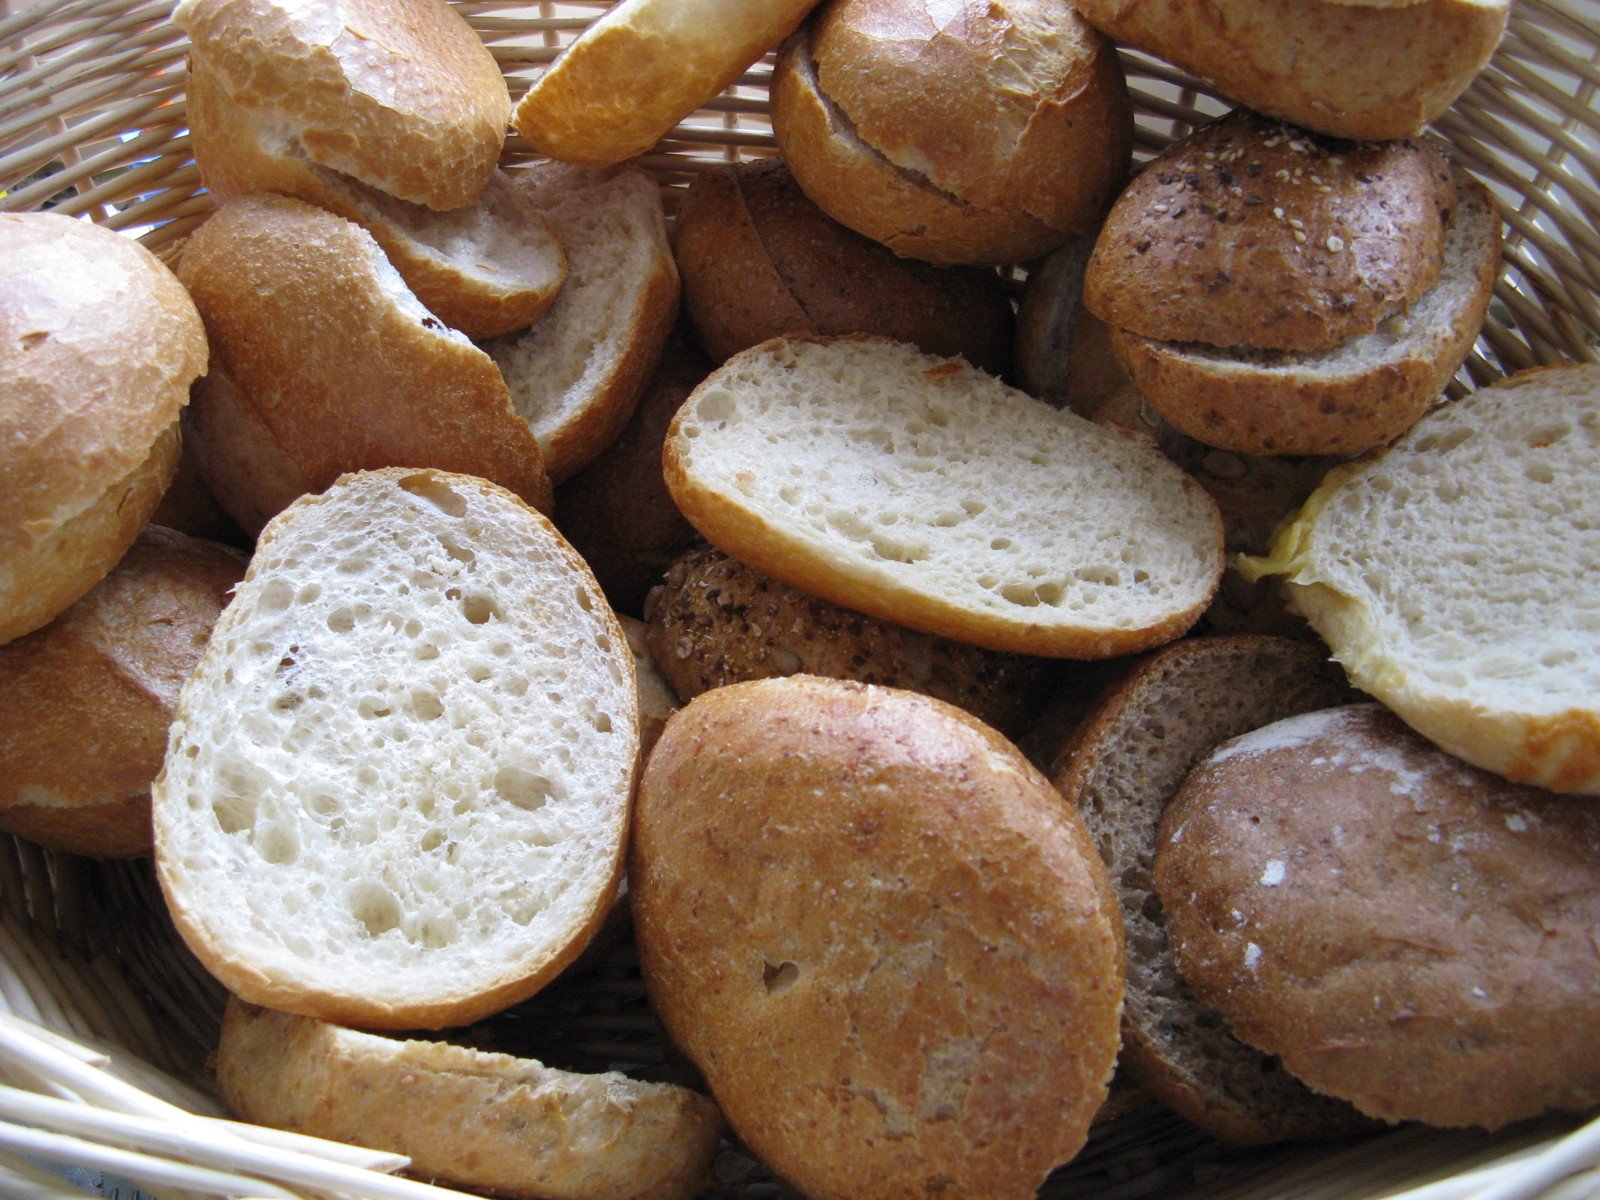 some bread rolls and other bread rolls in a basket